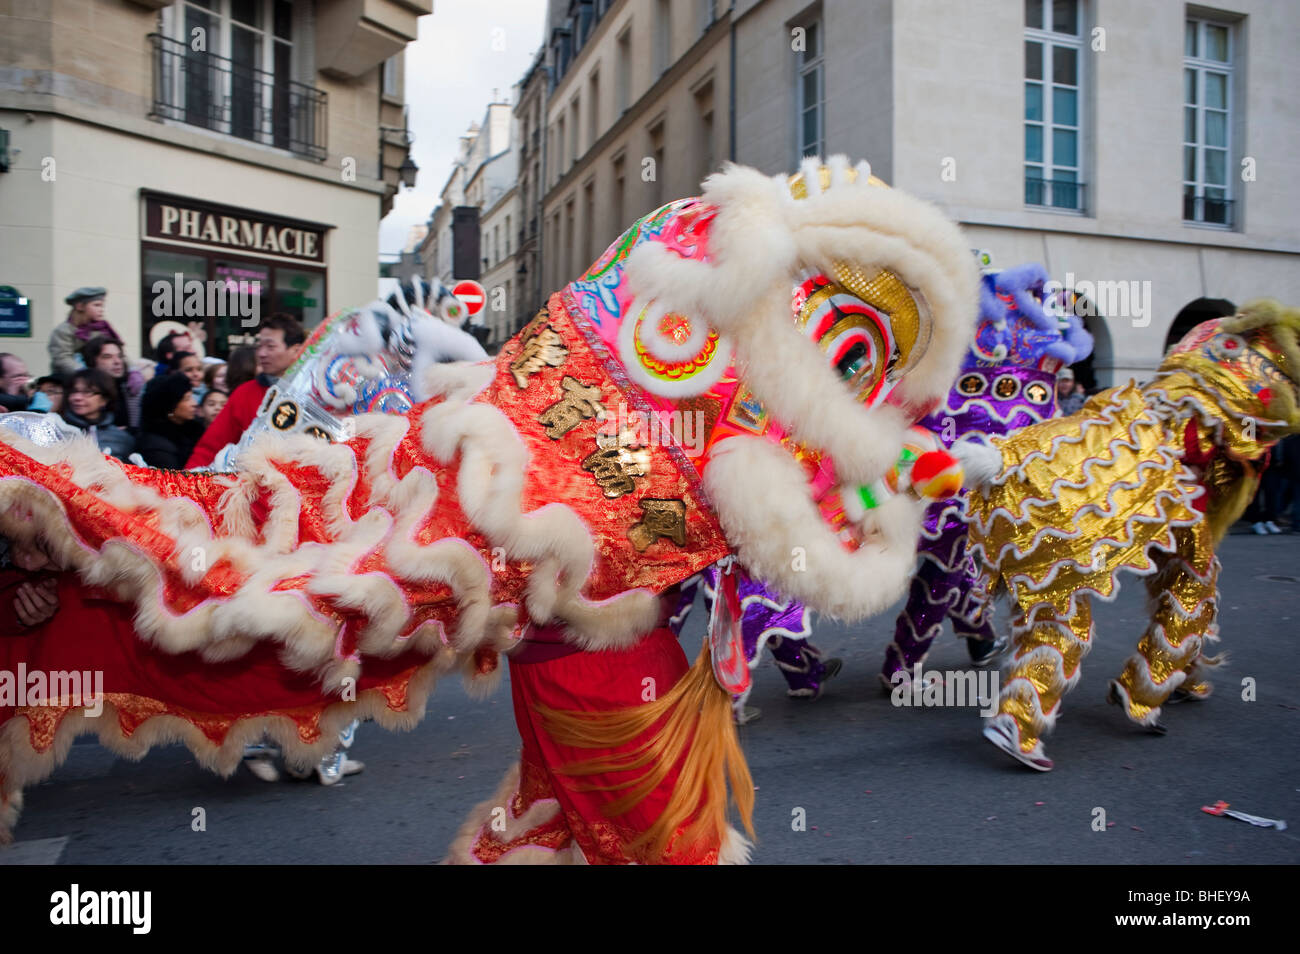 Paris, France, Asians Celebrating Chinese New year Annual Street Carnival Parade, 'Chinese Dragons' Dancing, Chinatown, Chinese Dragon Dance, Stock Photo